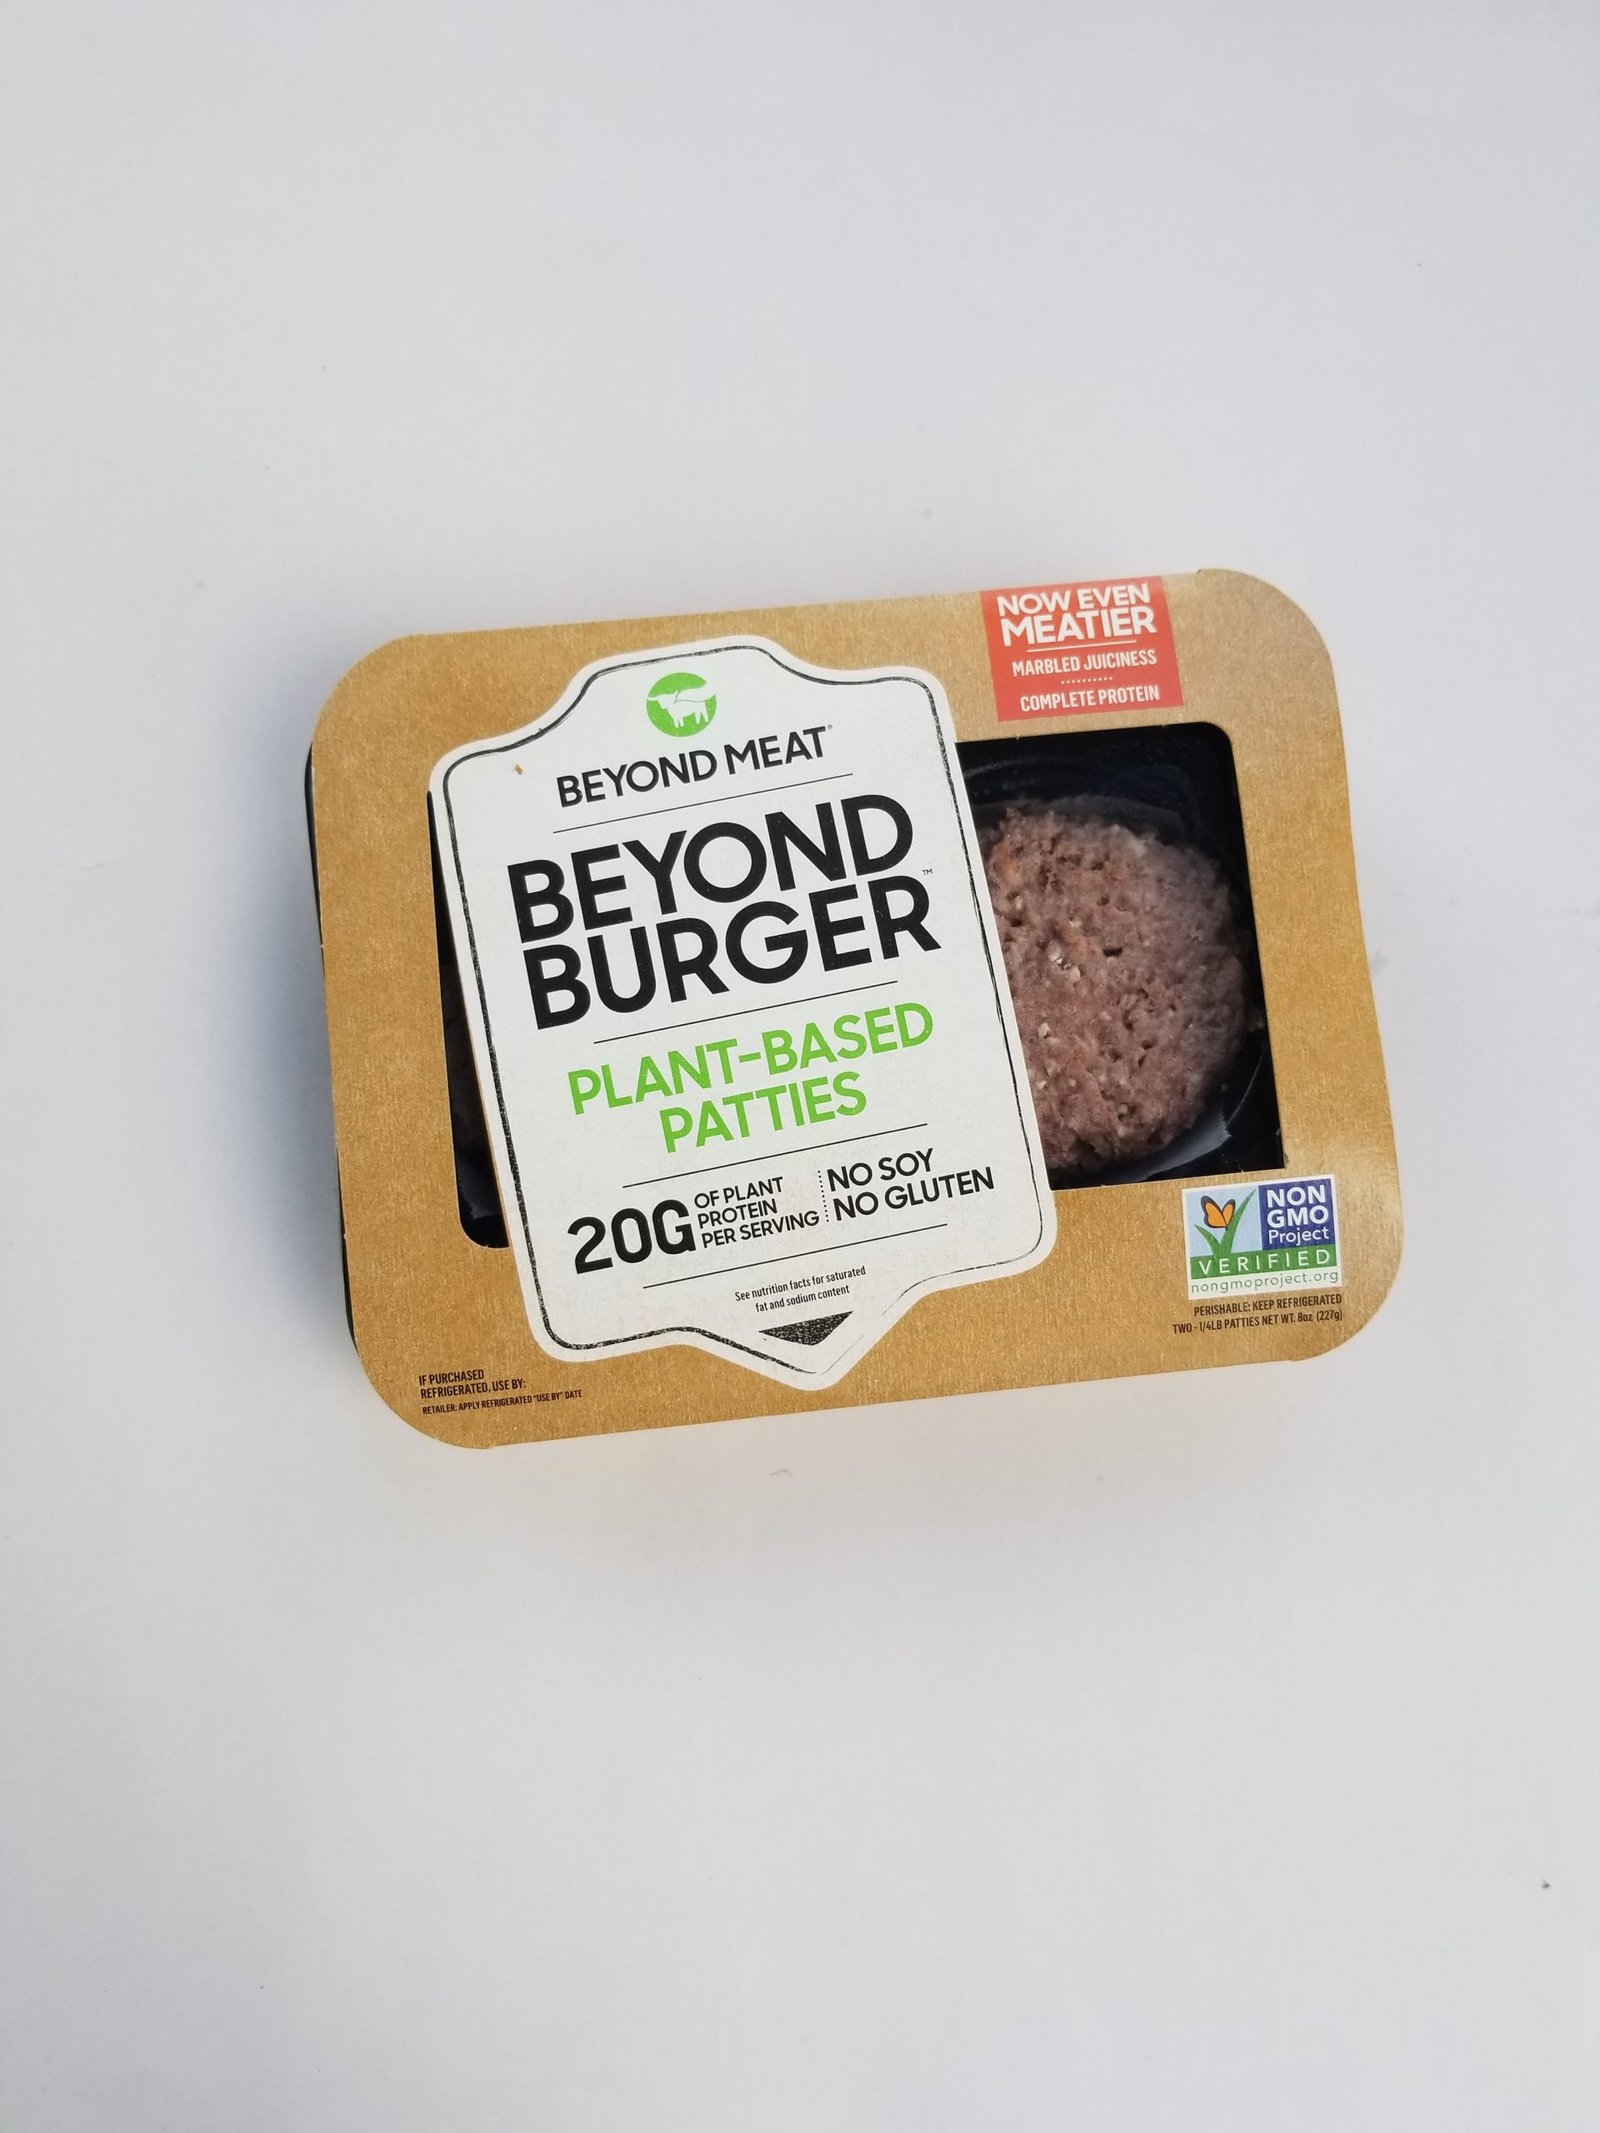 Why Beyond Meat Beyond Burger is Still Our Favorite - Be Meatless